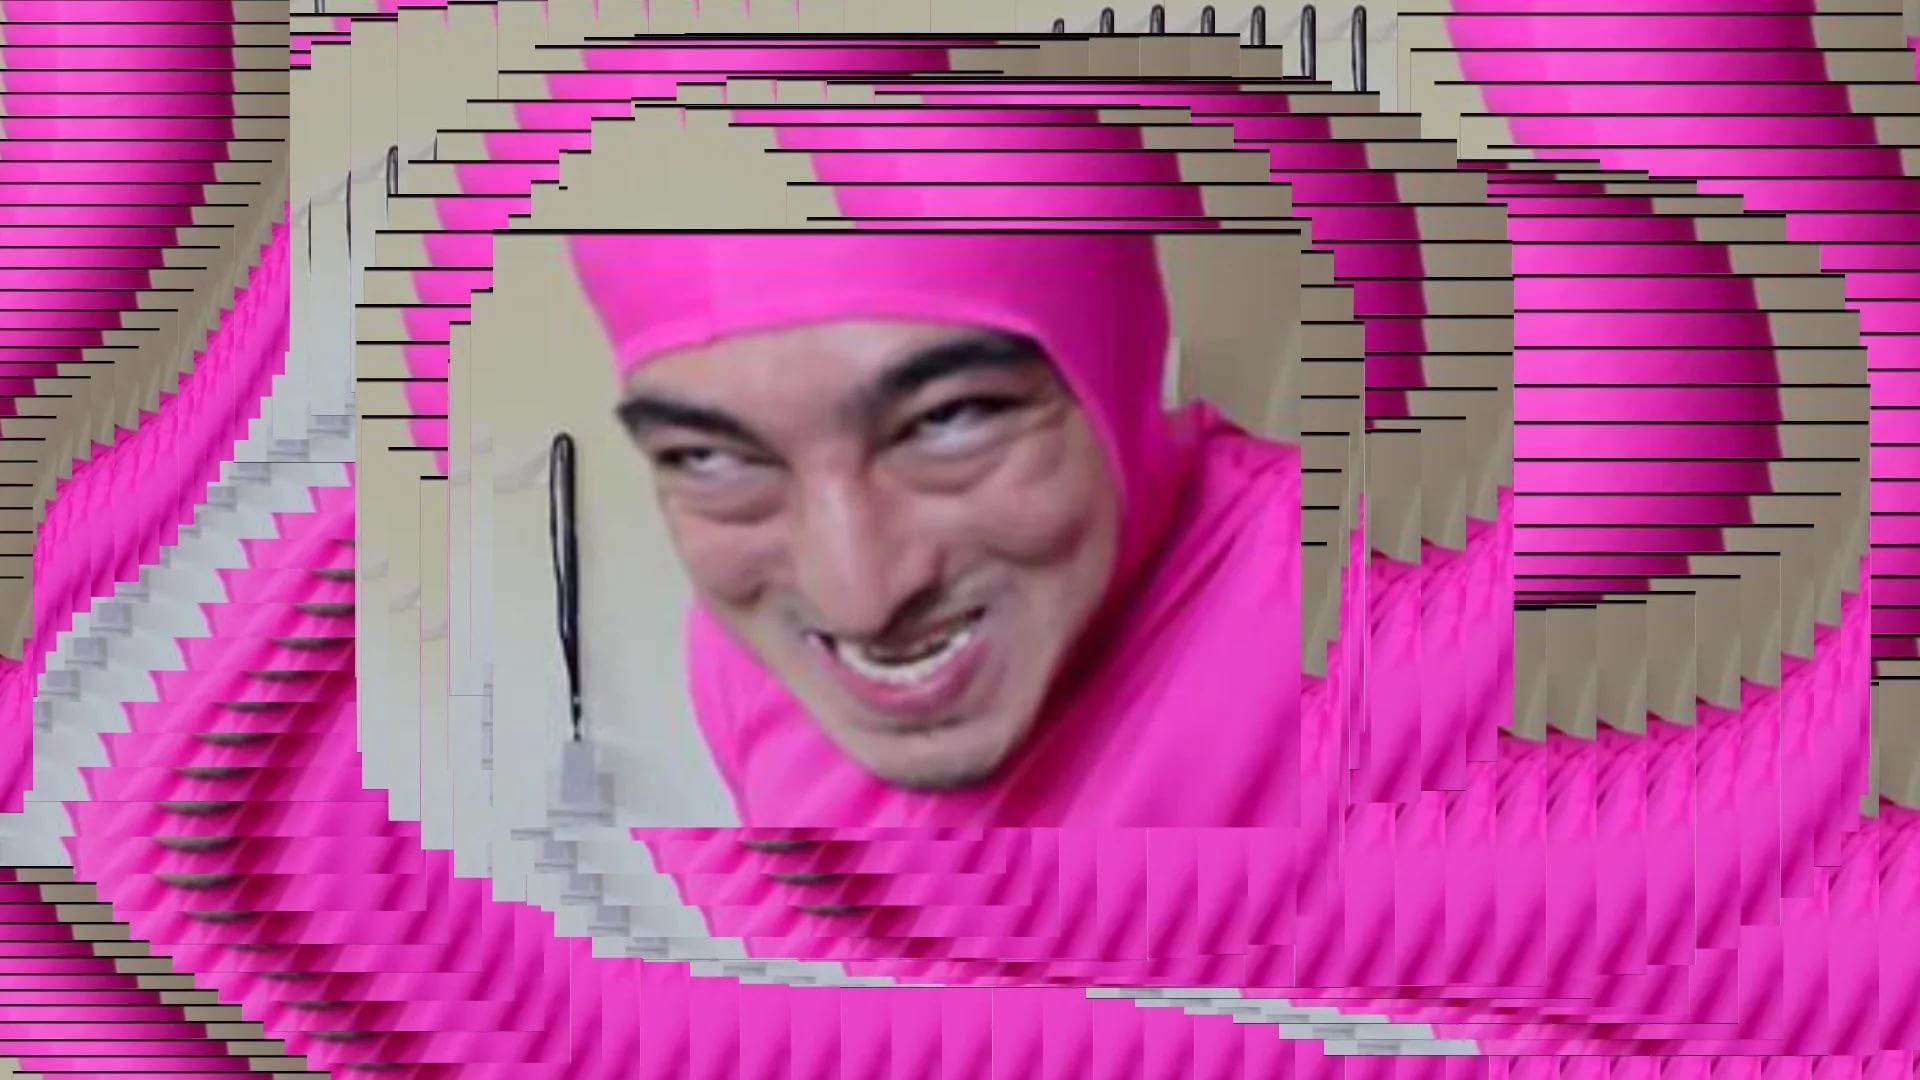 Filthy Frank Wallpapers: 20+ Image.